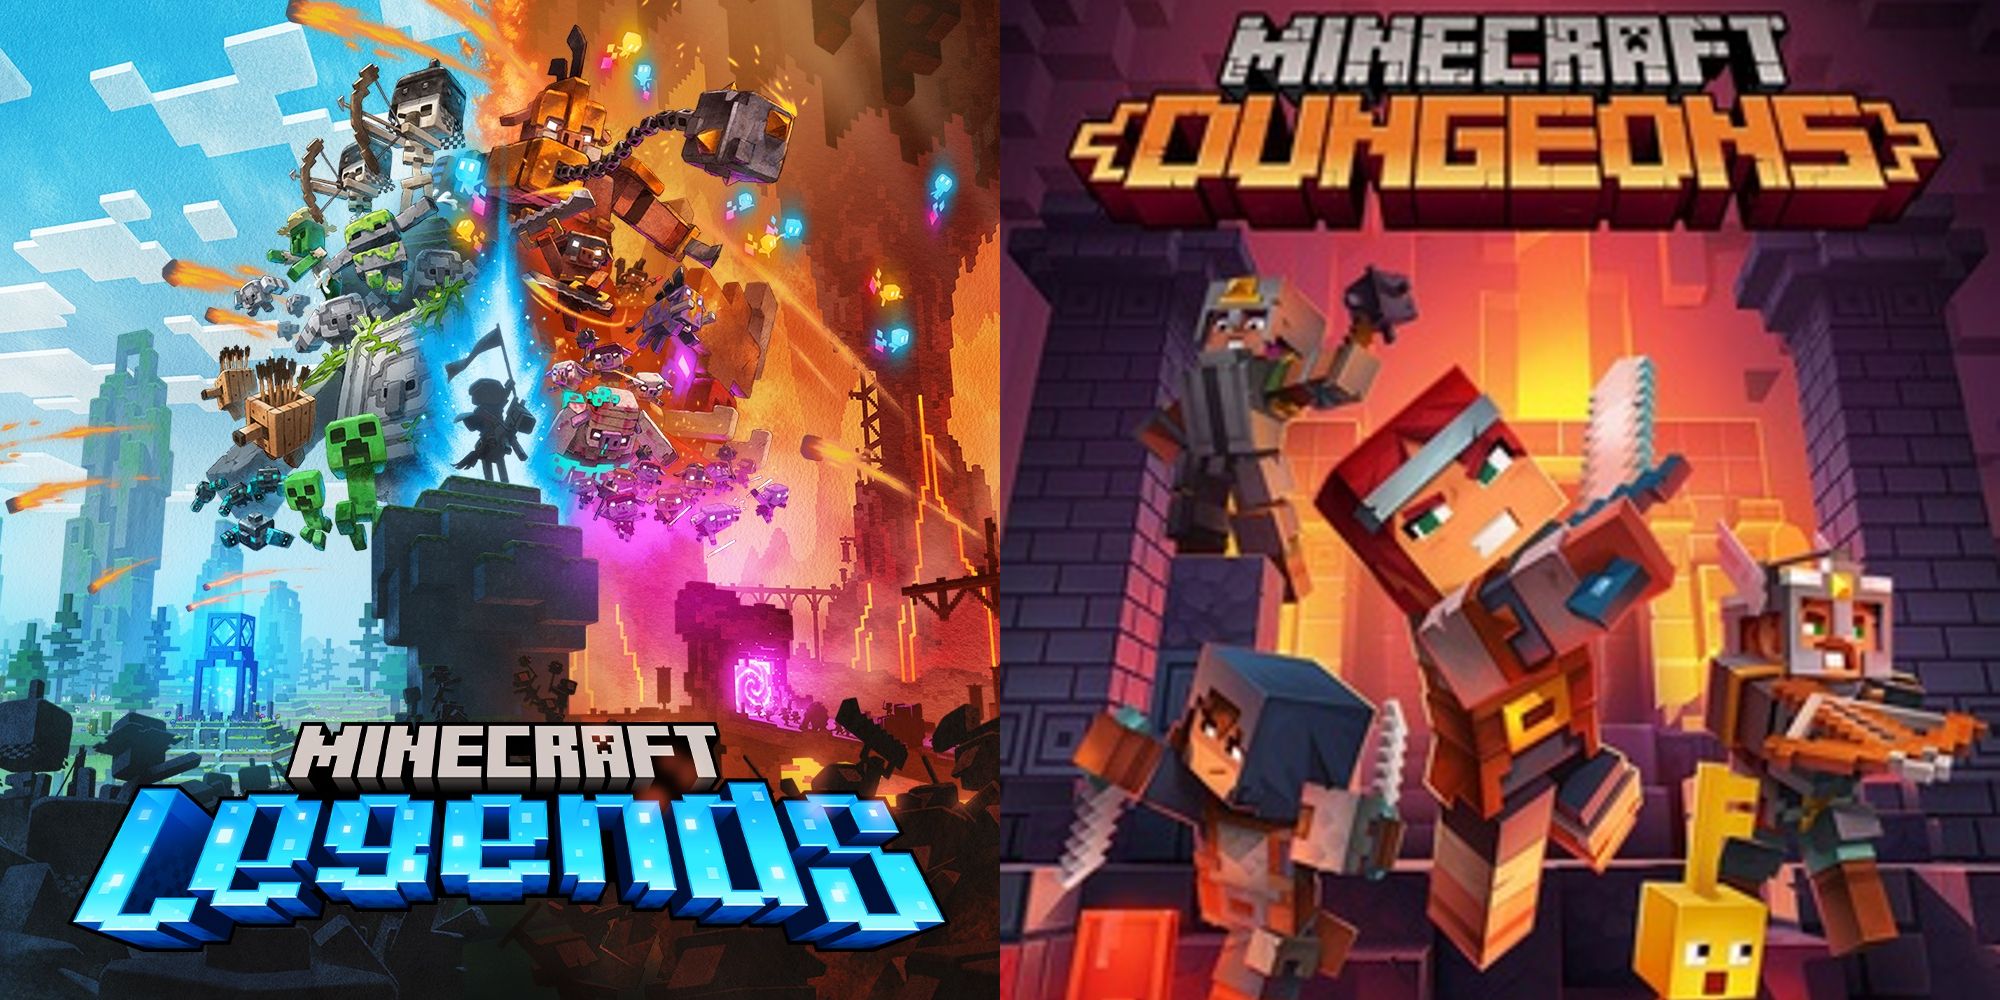 Minecraft Legends is more about the crafting than the mining